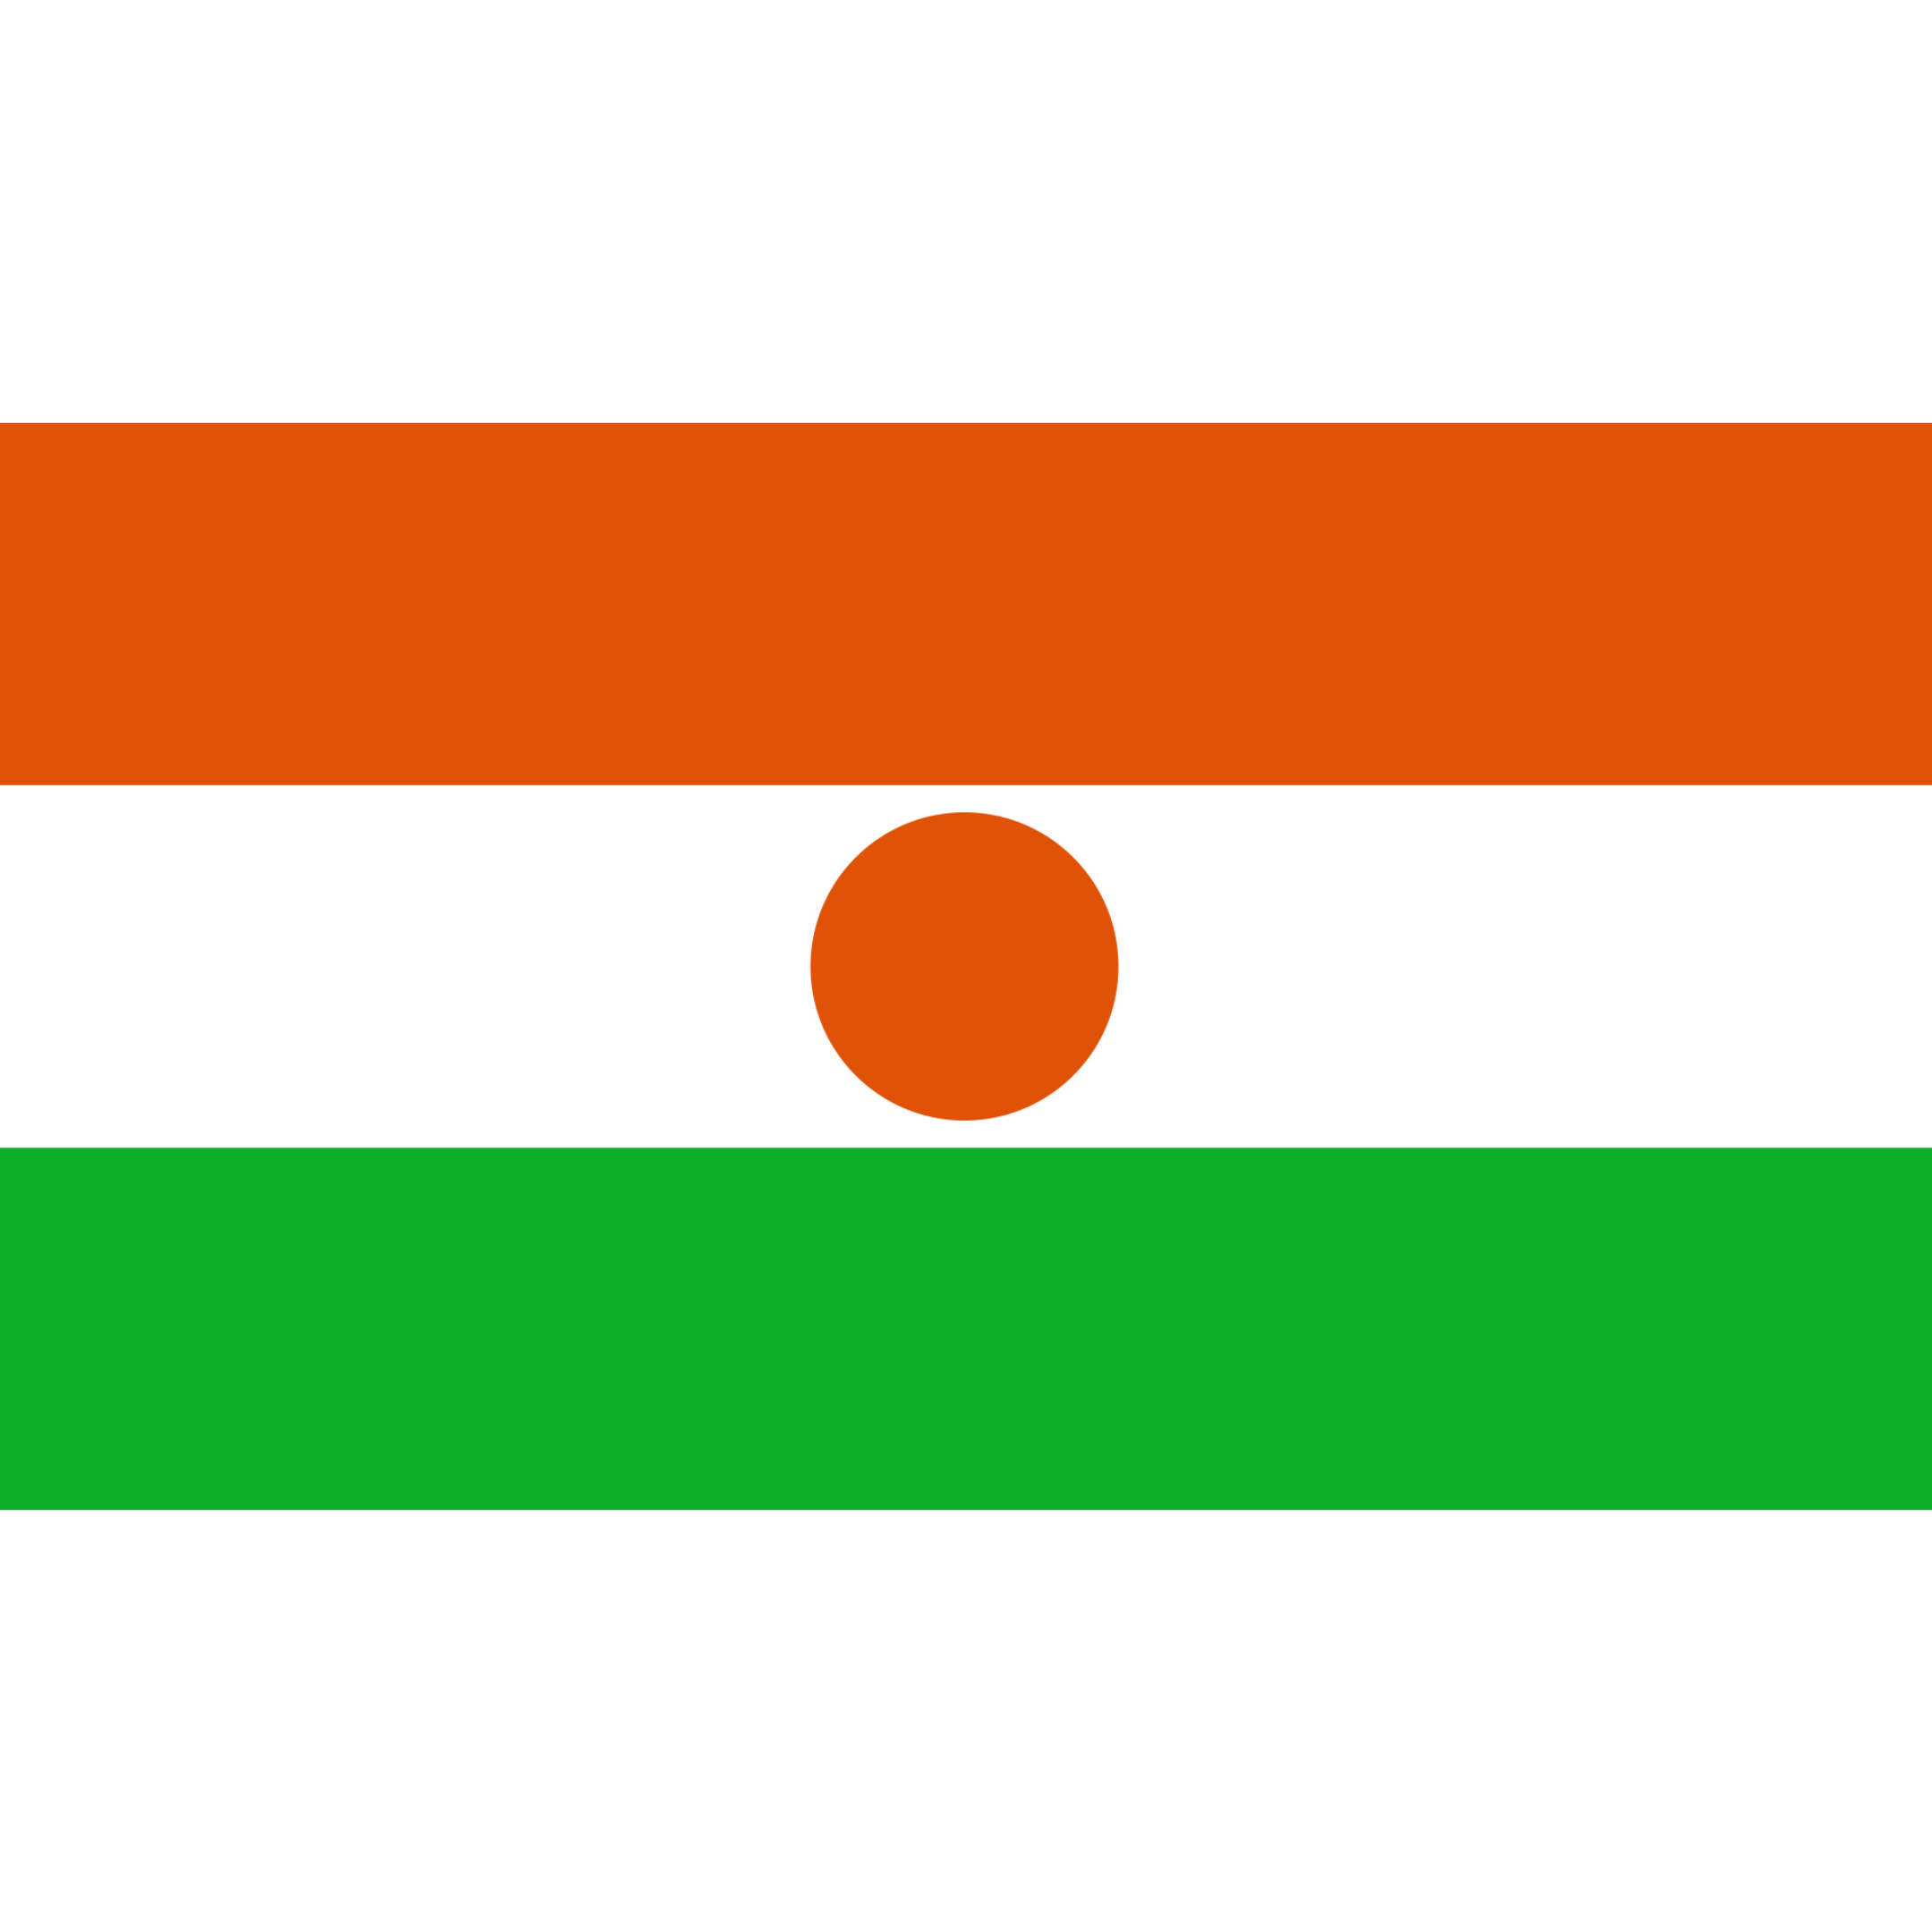 The flag of Niger has 3 horizontal bands of orange, white and green, with an orange circle in the centre.